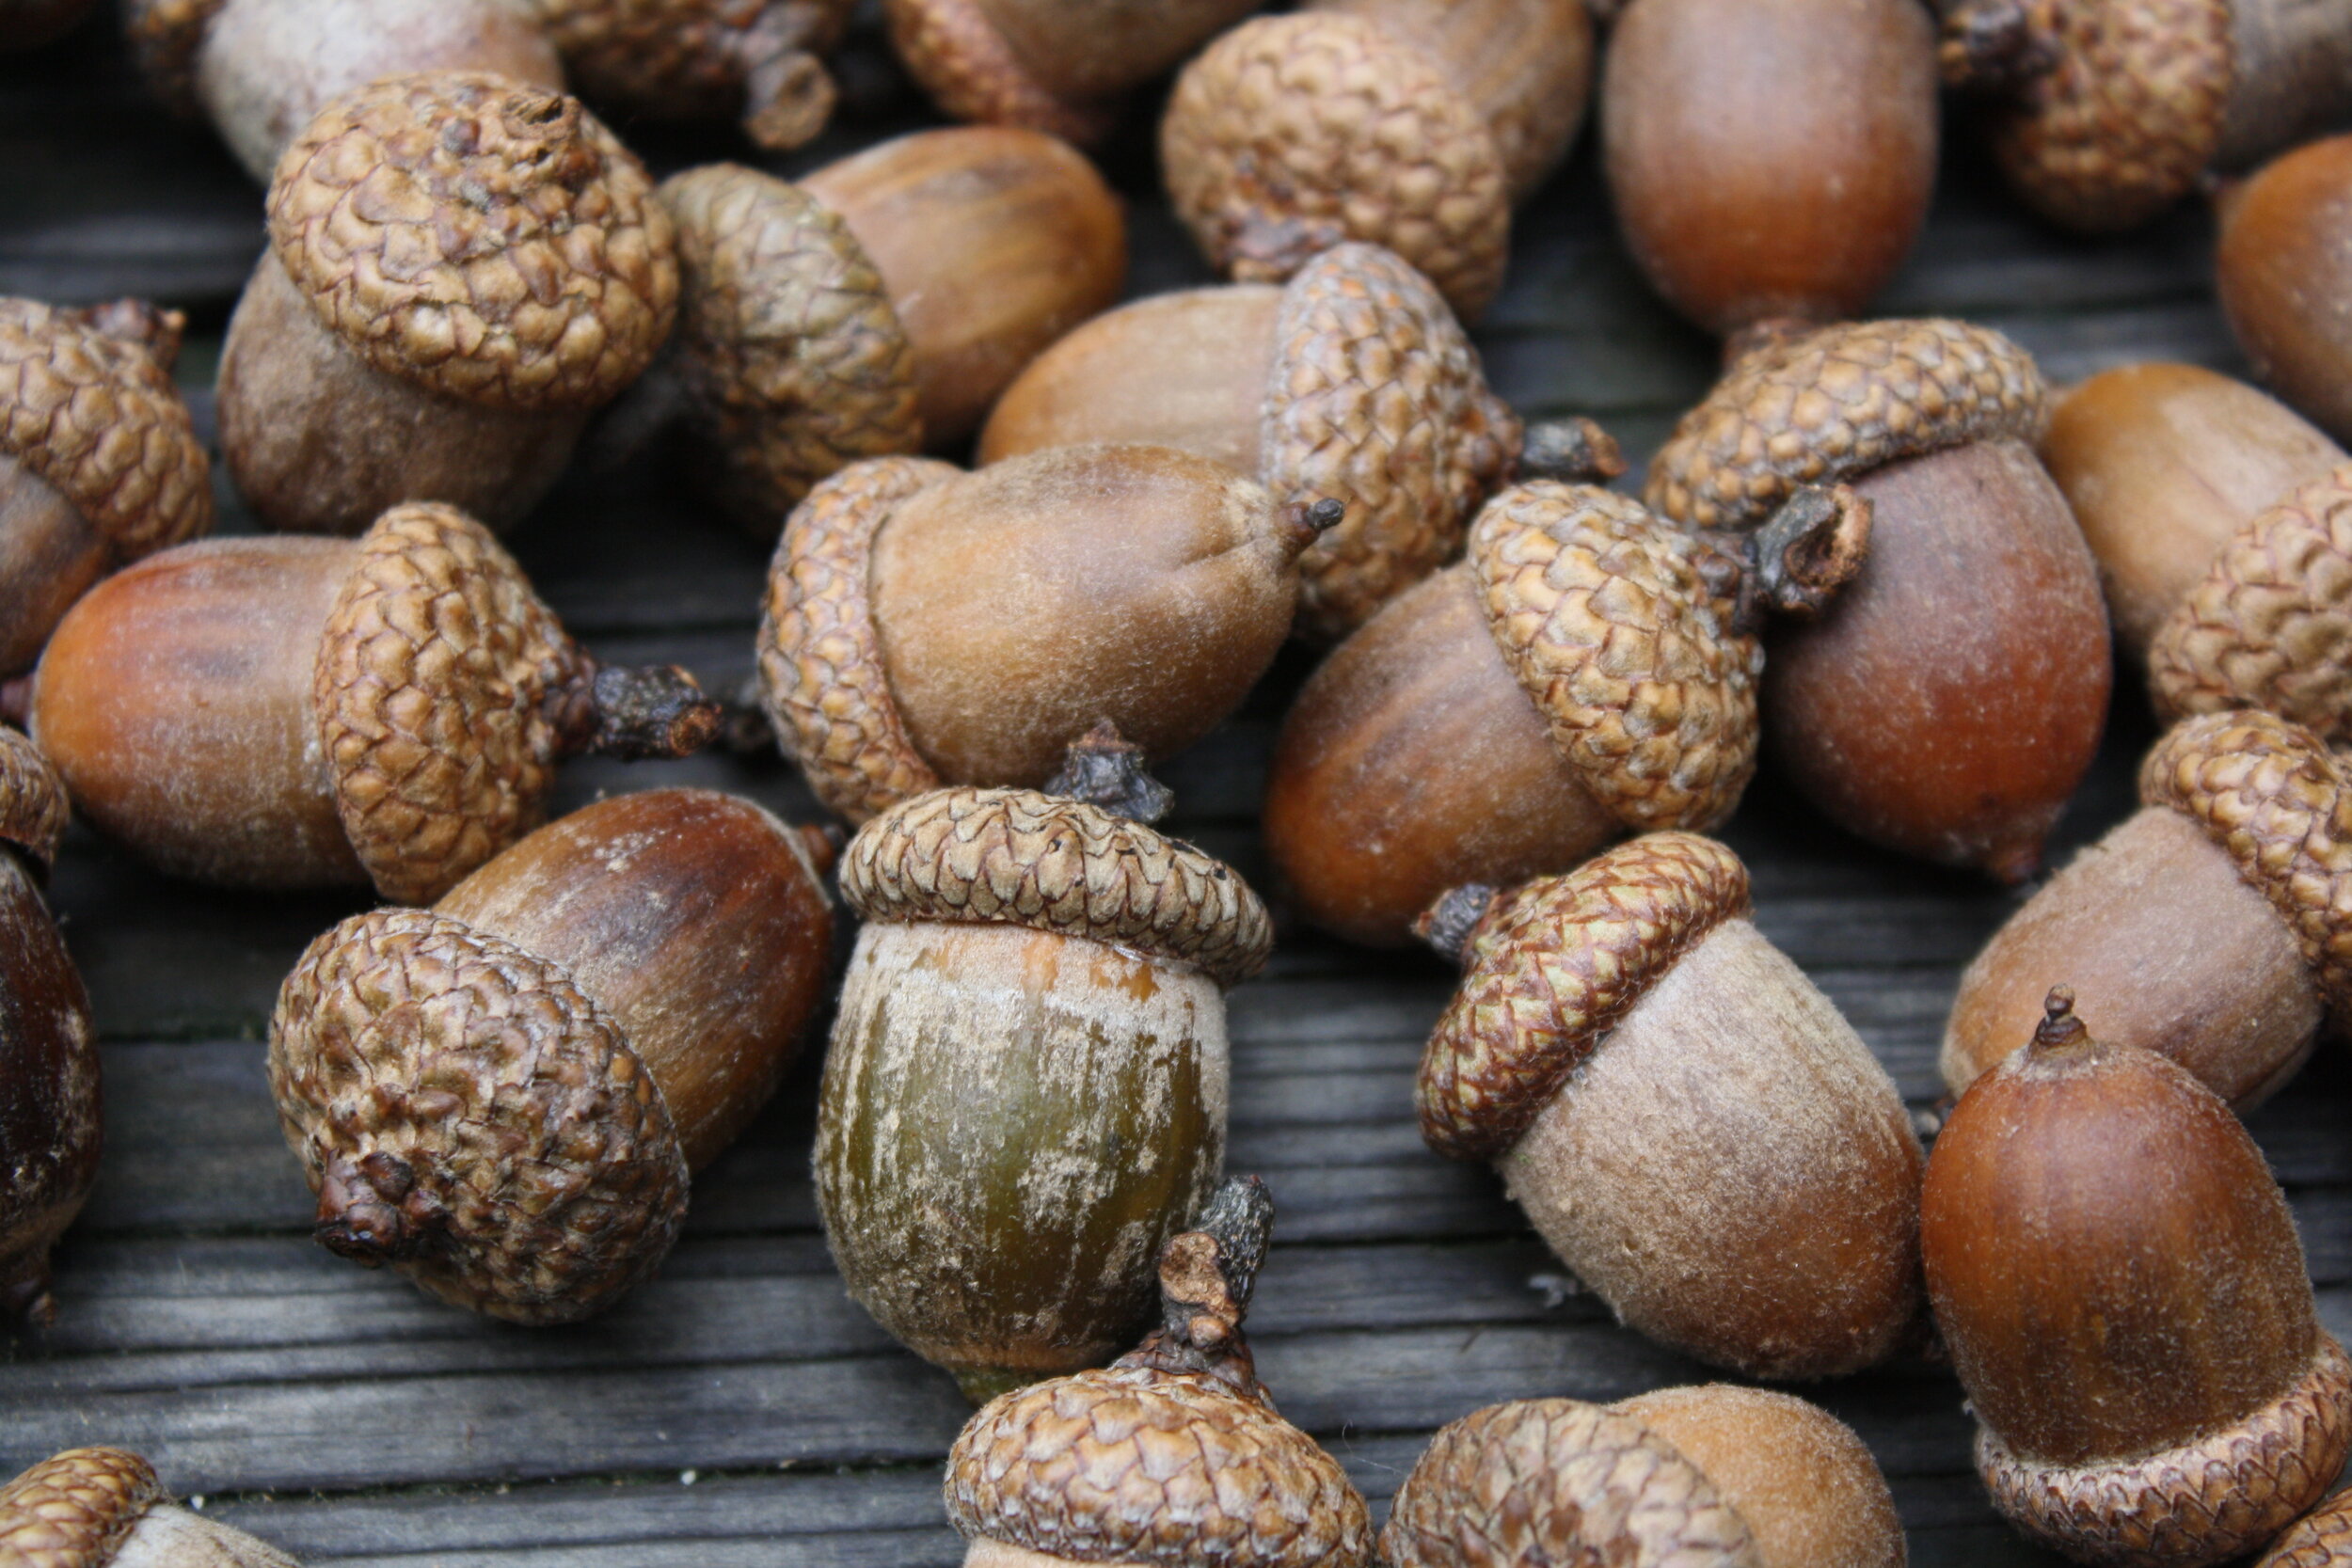 Large Acorns with affixed caps - Natural or Preserved with Shellac